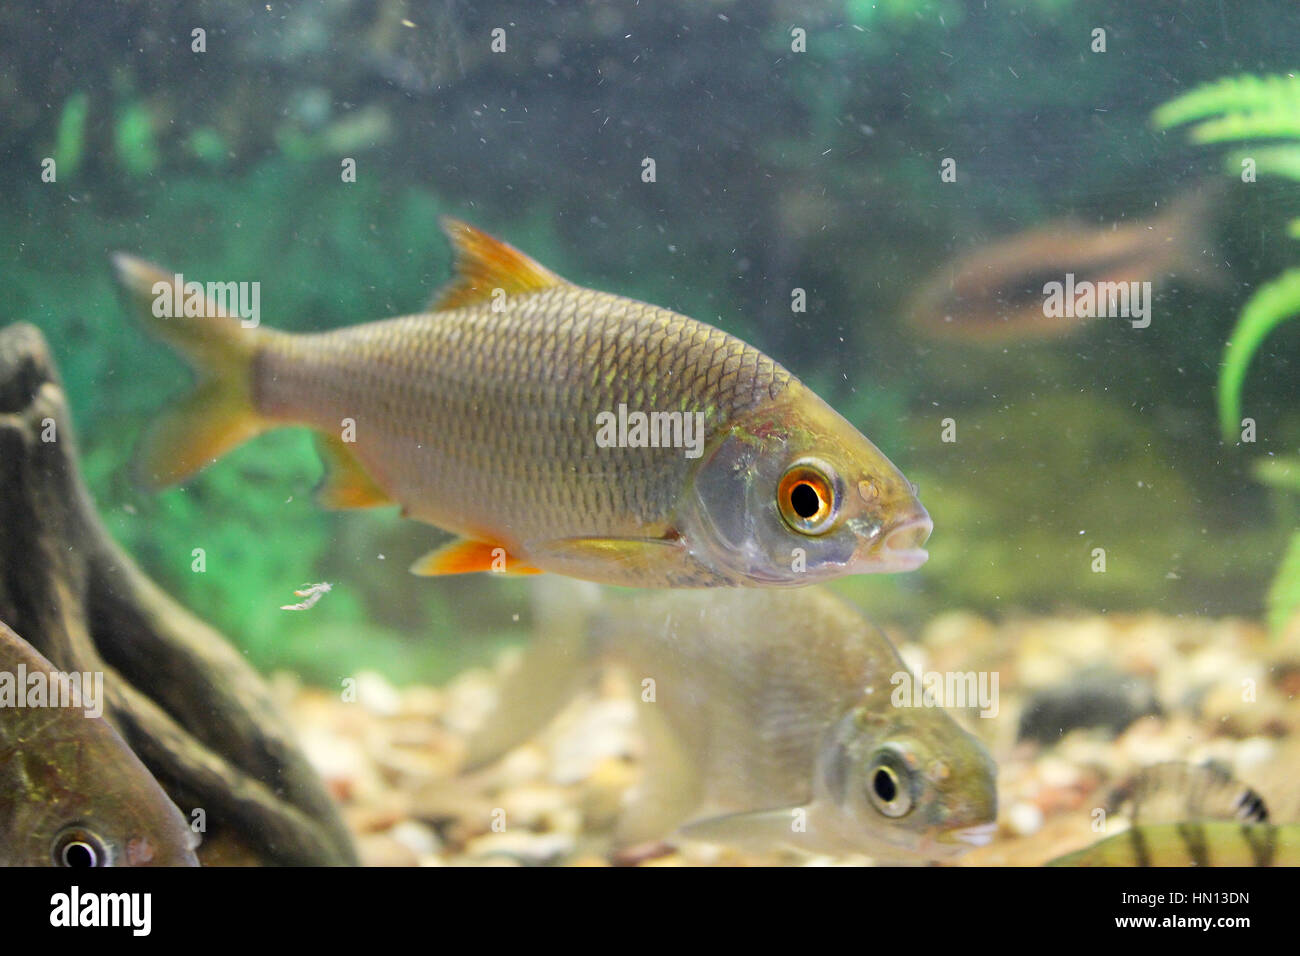 Carp, roach, gudgeon in the aquarium fresh water. The image can be used as educational material Stock Photo